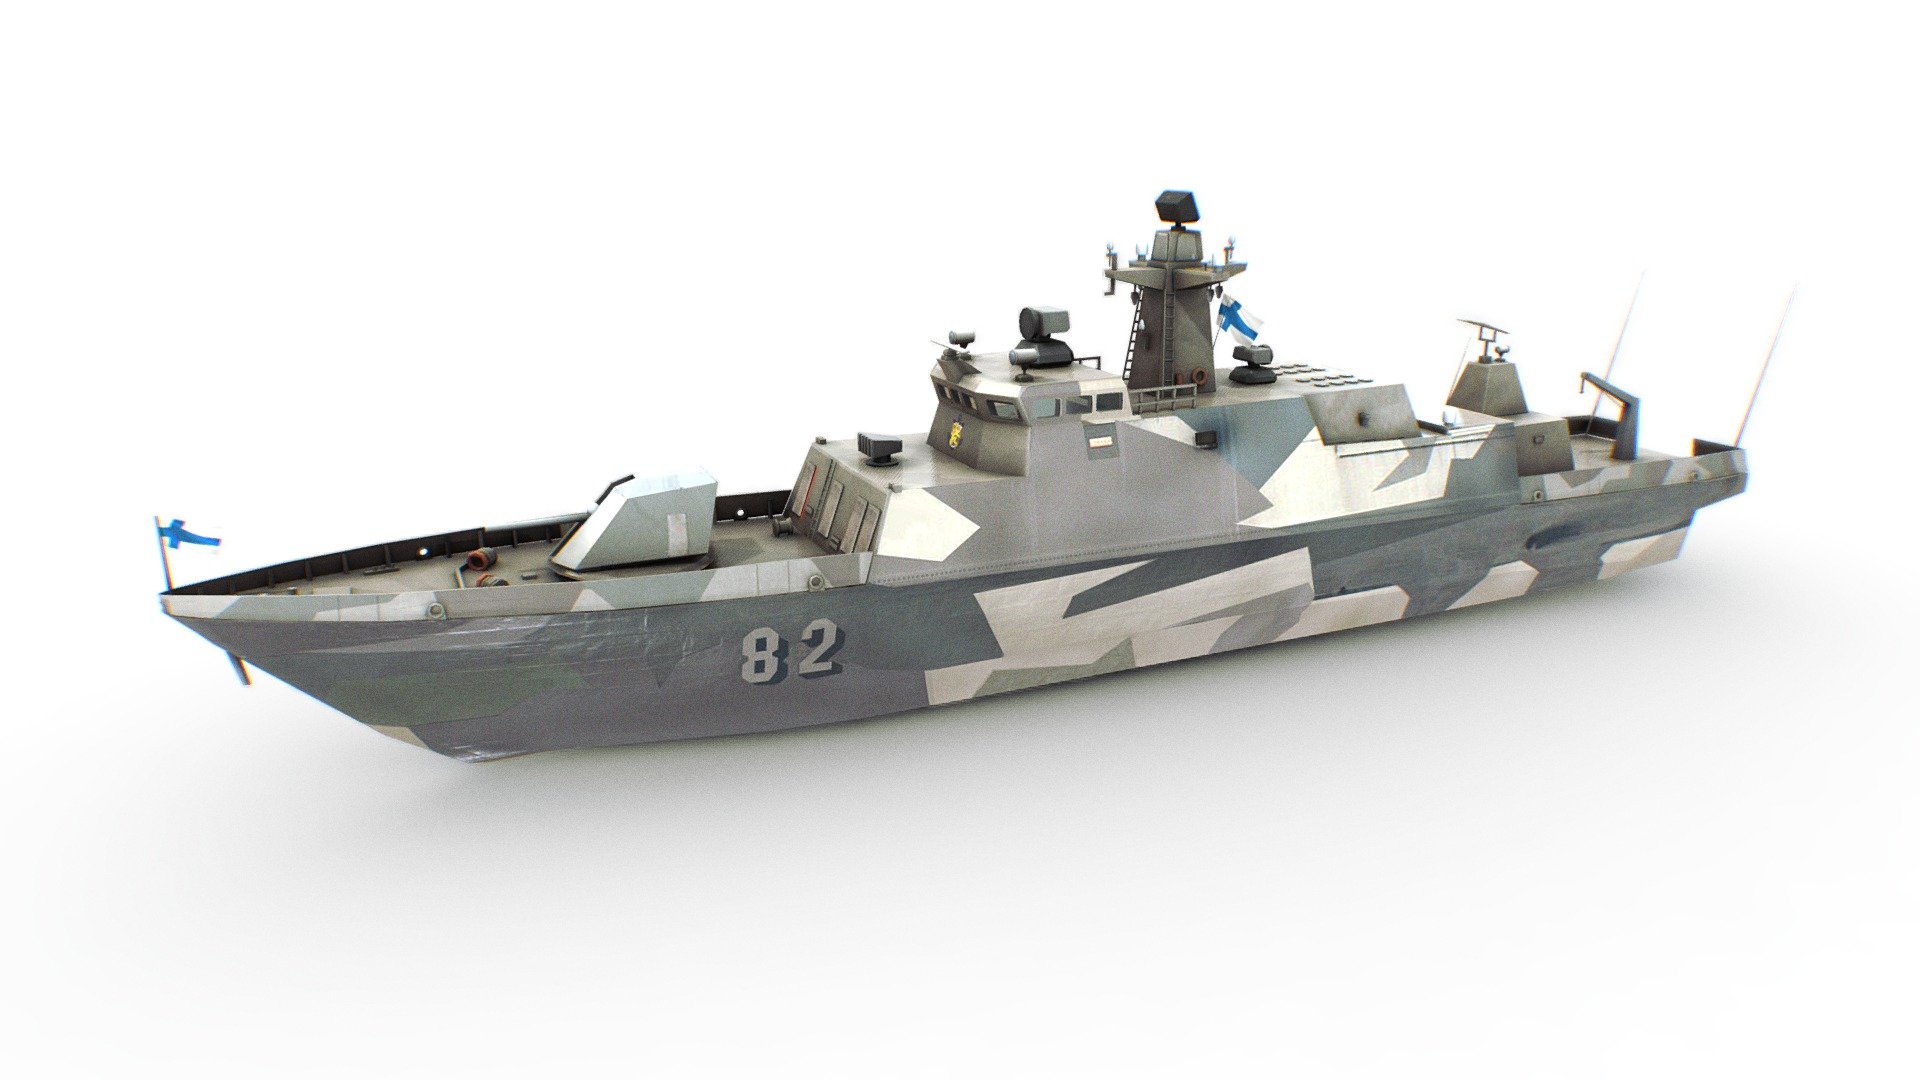 Hamina-class missile boat

Game ready, low poly model.

Easy repeatable texture.

General characteristics

Type:        Fast attack craft

Displacement:        250 tons
Length:        51 m (167 ft)

Beam:        8.5 m (28 ft)

Draught:        1.7 m (5 ft 7 in)

Propulsion:        2 × MTU 16V 538 TB93 diesels; 5520 .

Speed:        30+ knots

Range:        500 nmi (930 km; 580 mi)

Complement:        26

Sensors and
processing systems:        

Ceros-200 FCS (Saab)
Consilium Selesmar maritime radar
TRS-3D/16-ES multimode acquisition 3D radar (EADS)
ANCS 2000 Combat Management System (EADS)
MSSR 2000 I IFF (EADS)
EOMS (SAGEM)
Simrad Subsea Toadfish sonar
Sonac/PTA towed array sonar (Finnyards)

Electronic warfare
and decoys:        

MASS (Multi Ammunition Soft-kill System) (Rheinmetall)
Decoys: Philax chaff, IR flares

Smoke system: Lacroix ATOS
EMS: Matilda radar warning system (Thales)

Notes:        Ships in class include:
Hamina (80)
Tornio (81)
Hanko (82)
Pori (83) - Hamina missile boat - Buy Royalty Free 3D model by Omni Studio 3D (@omny3d) 3d model